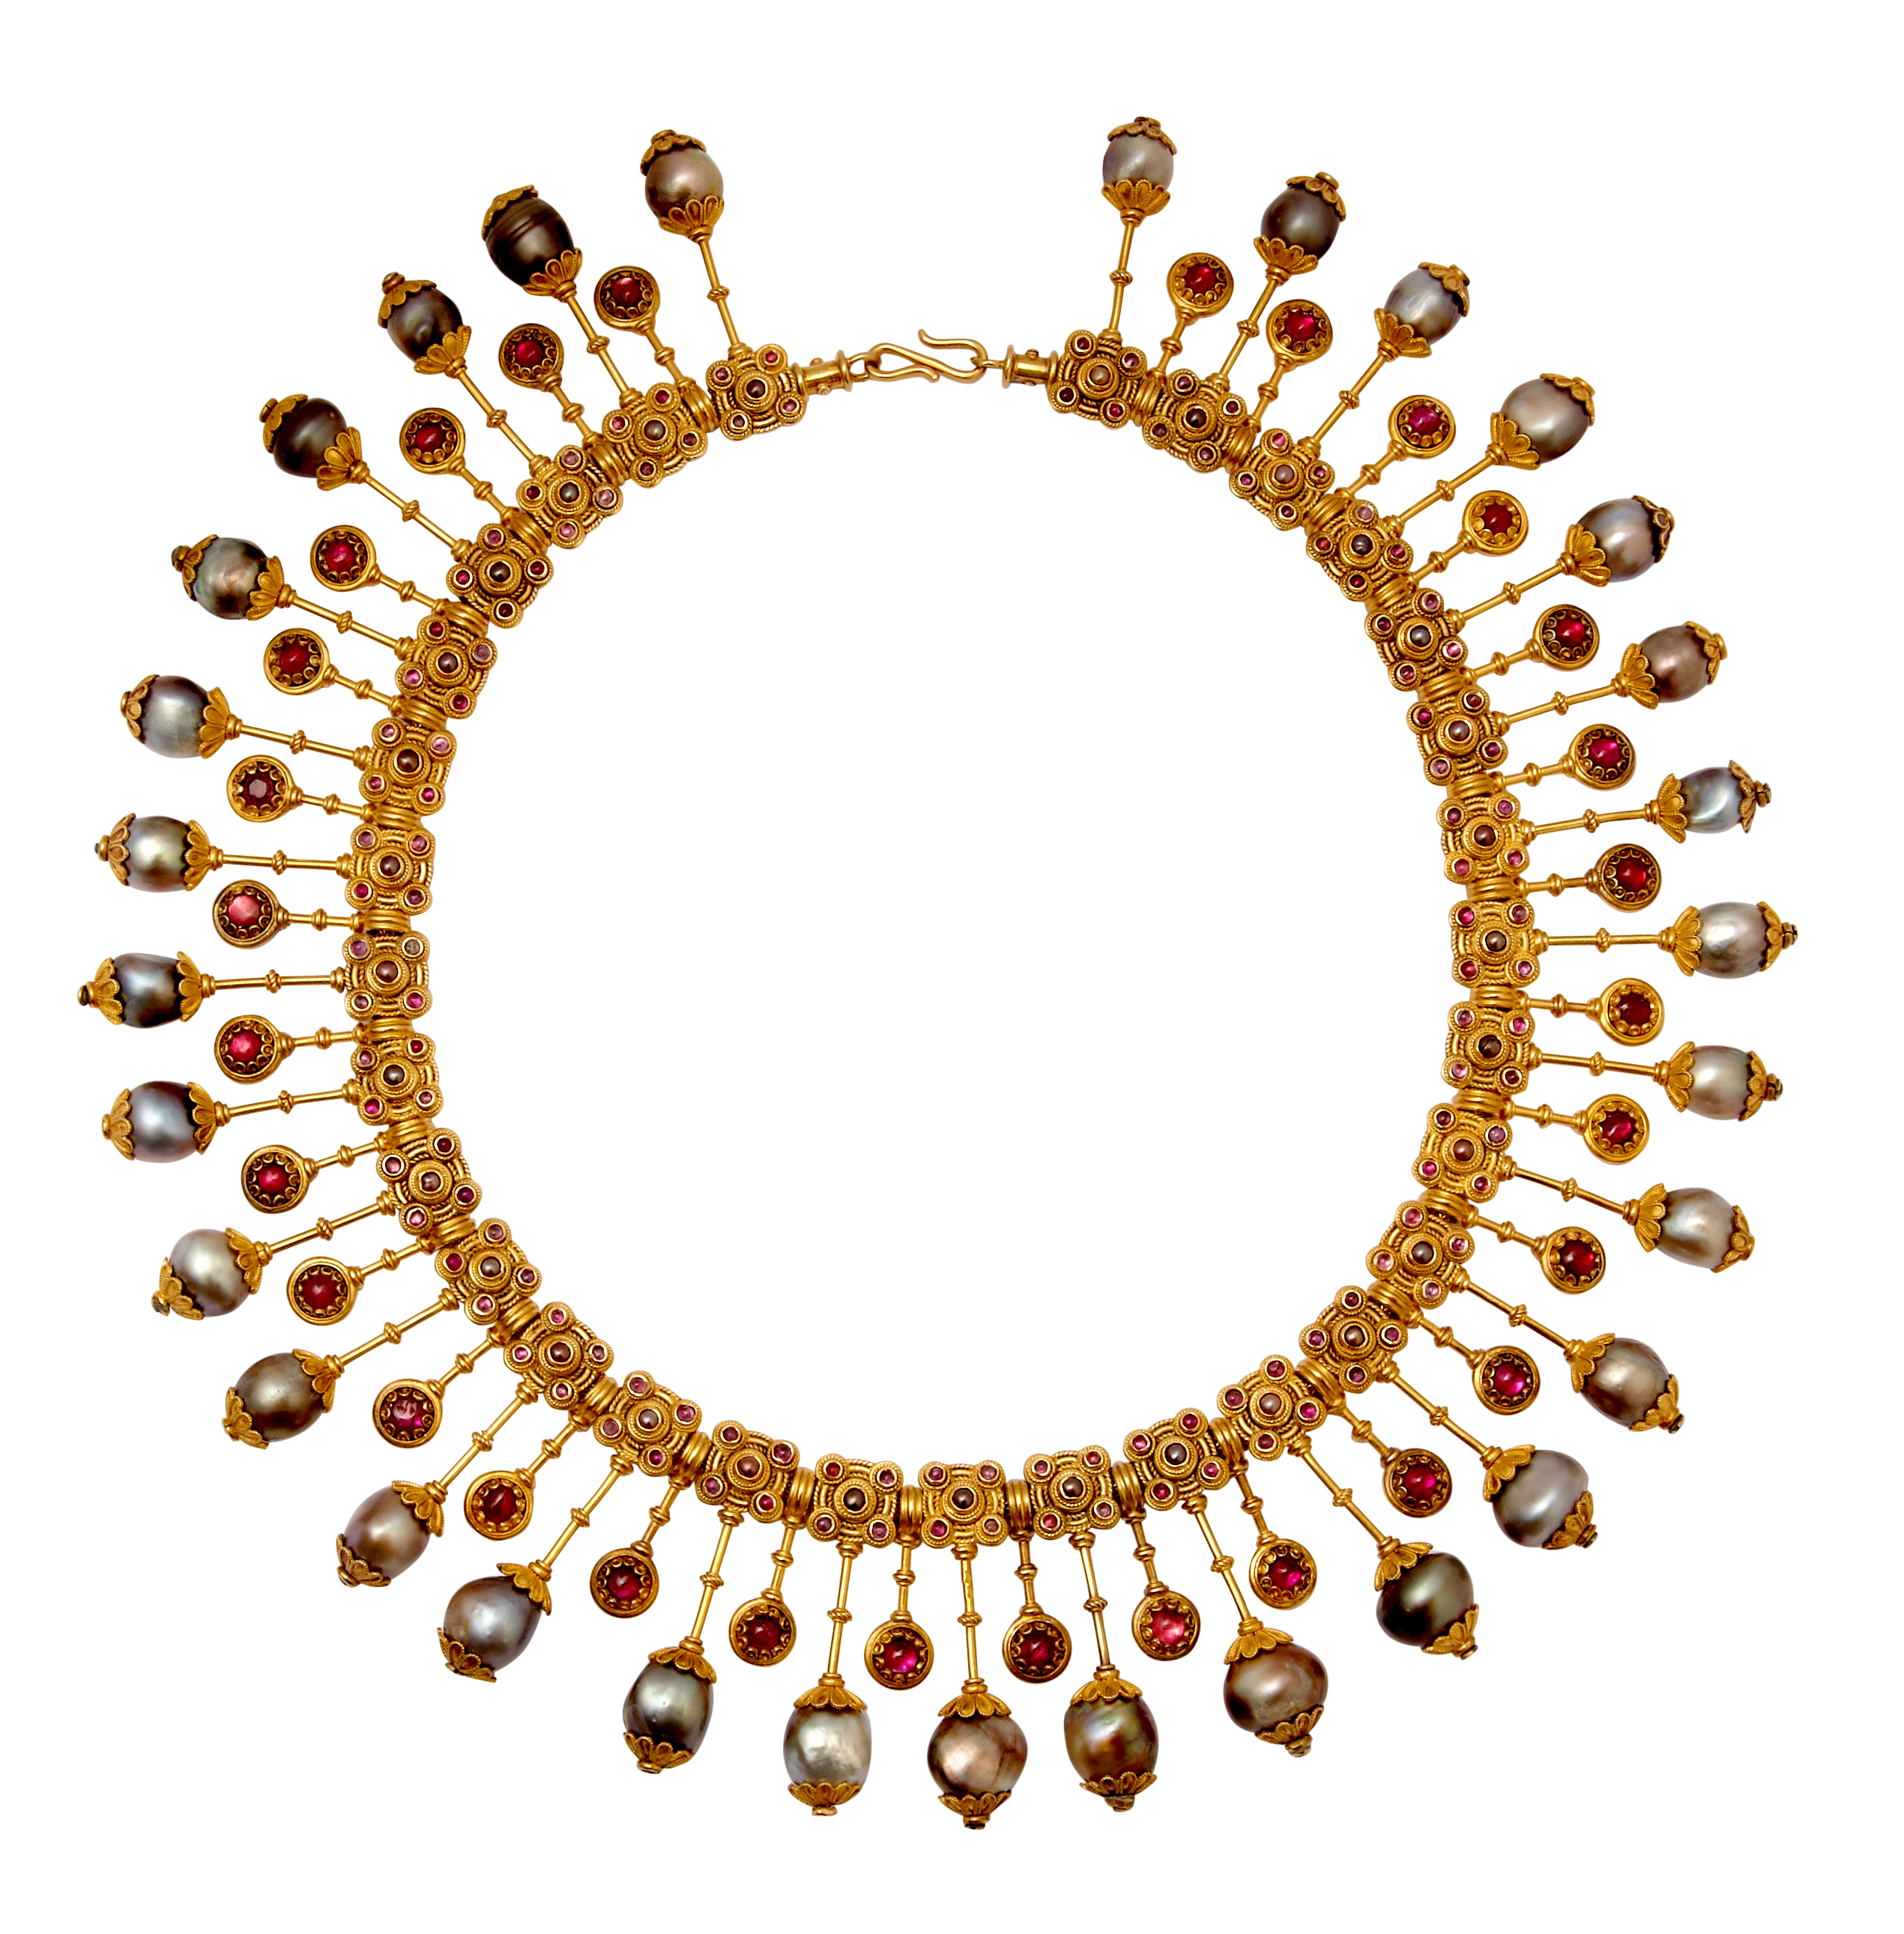 Archaeological revival necklace